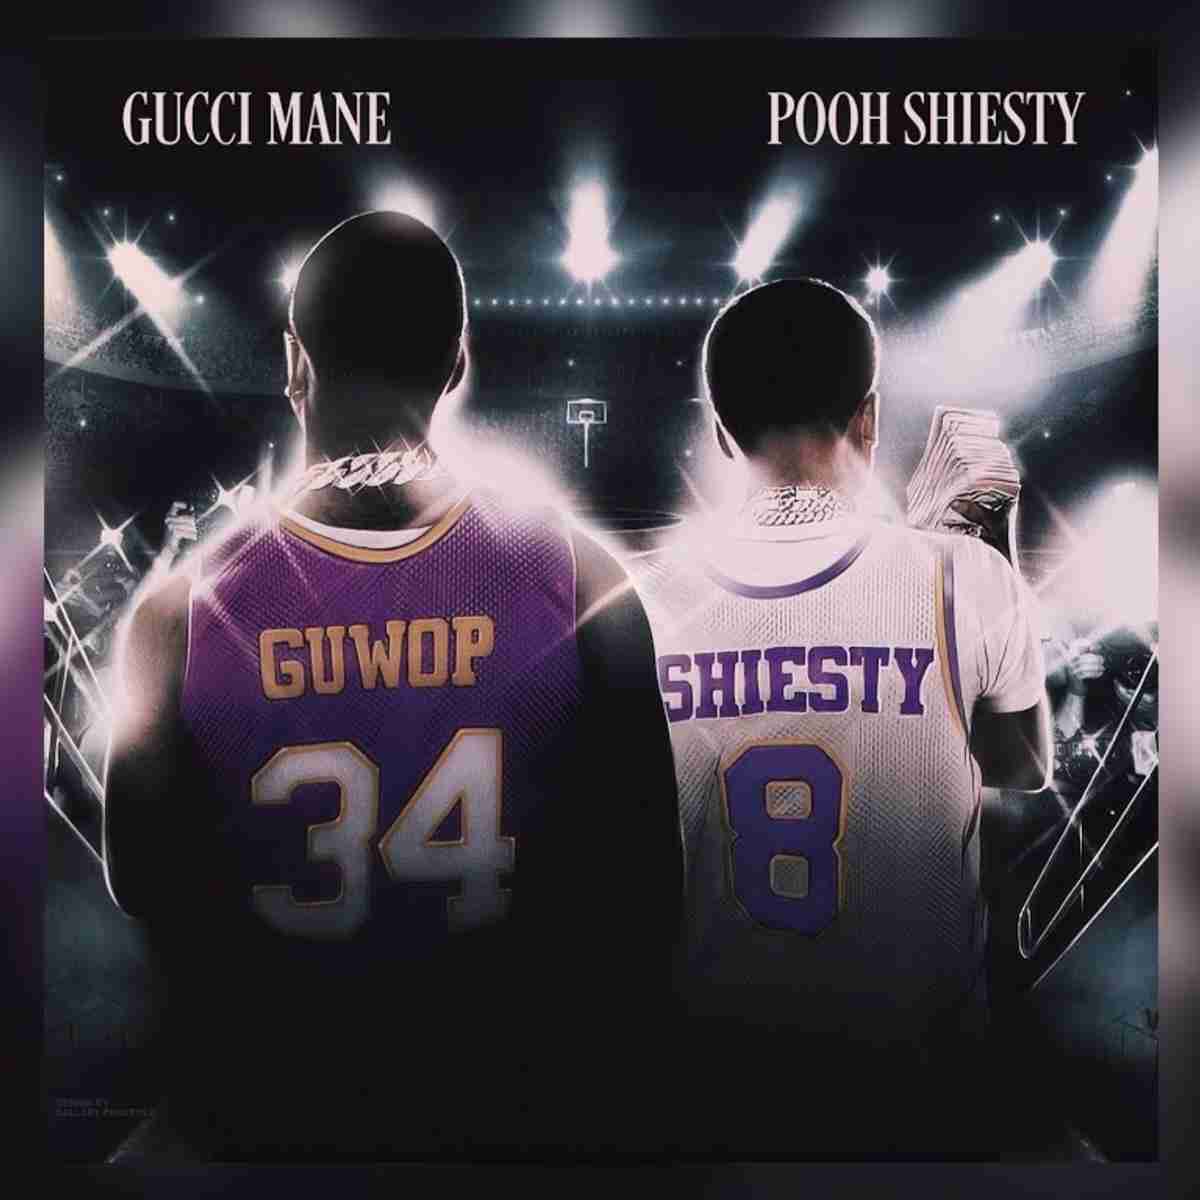 Gucci Mane - 34 & 8 Ft. Pooh Shiesty